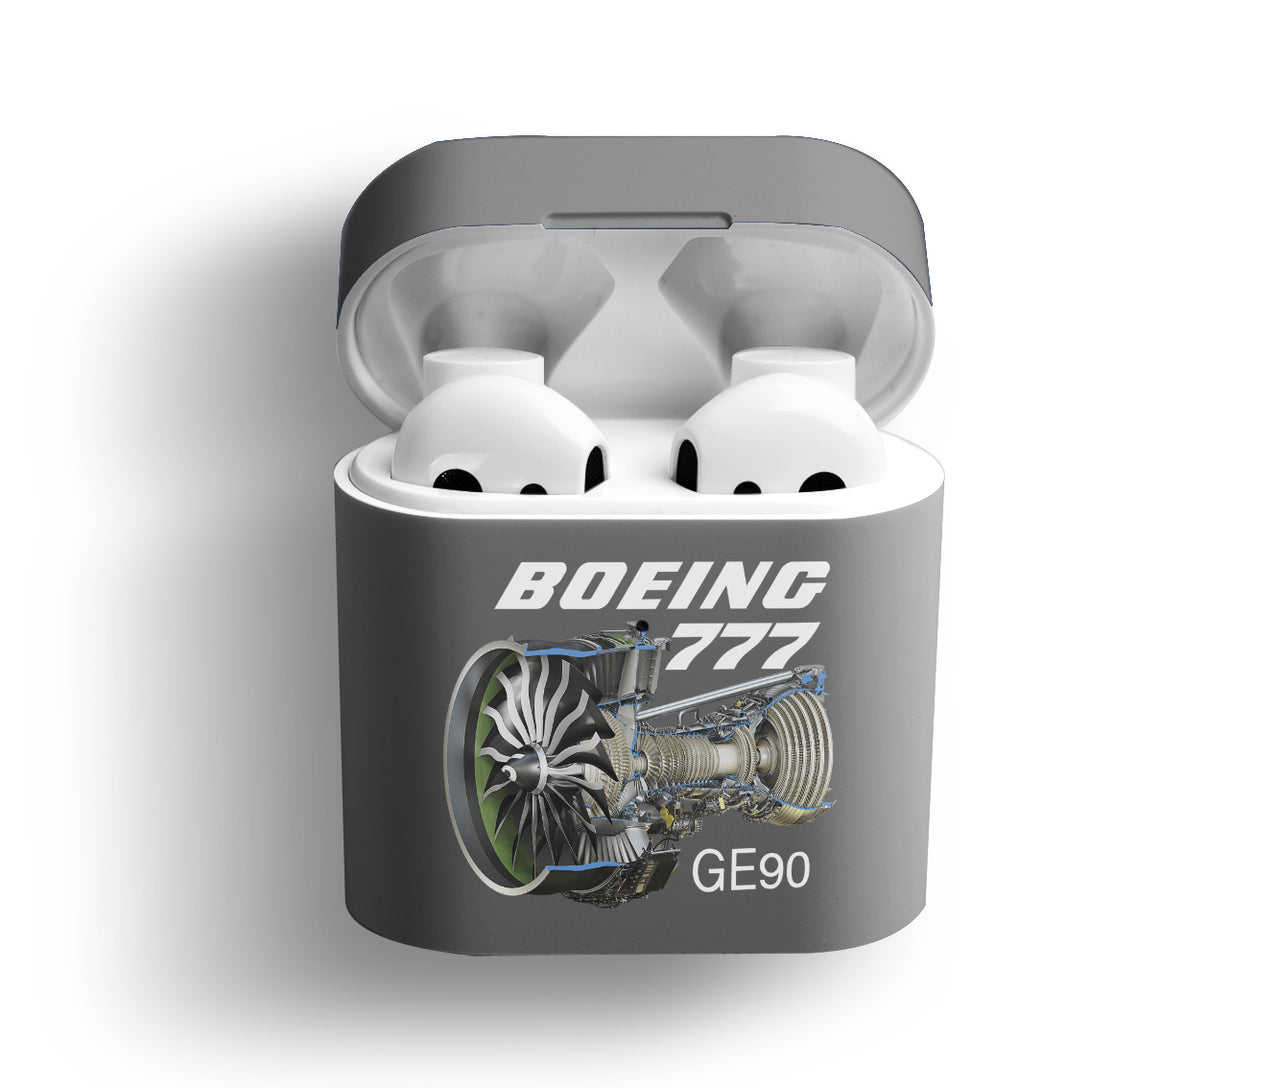 Boeing 777 & GE90 Engine Designed AirPods  Cases